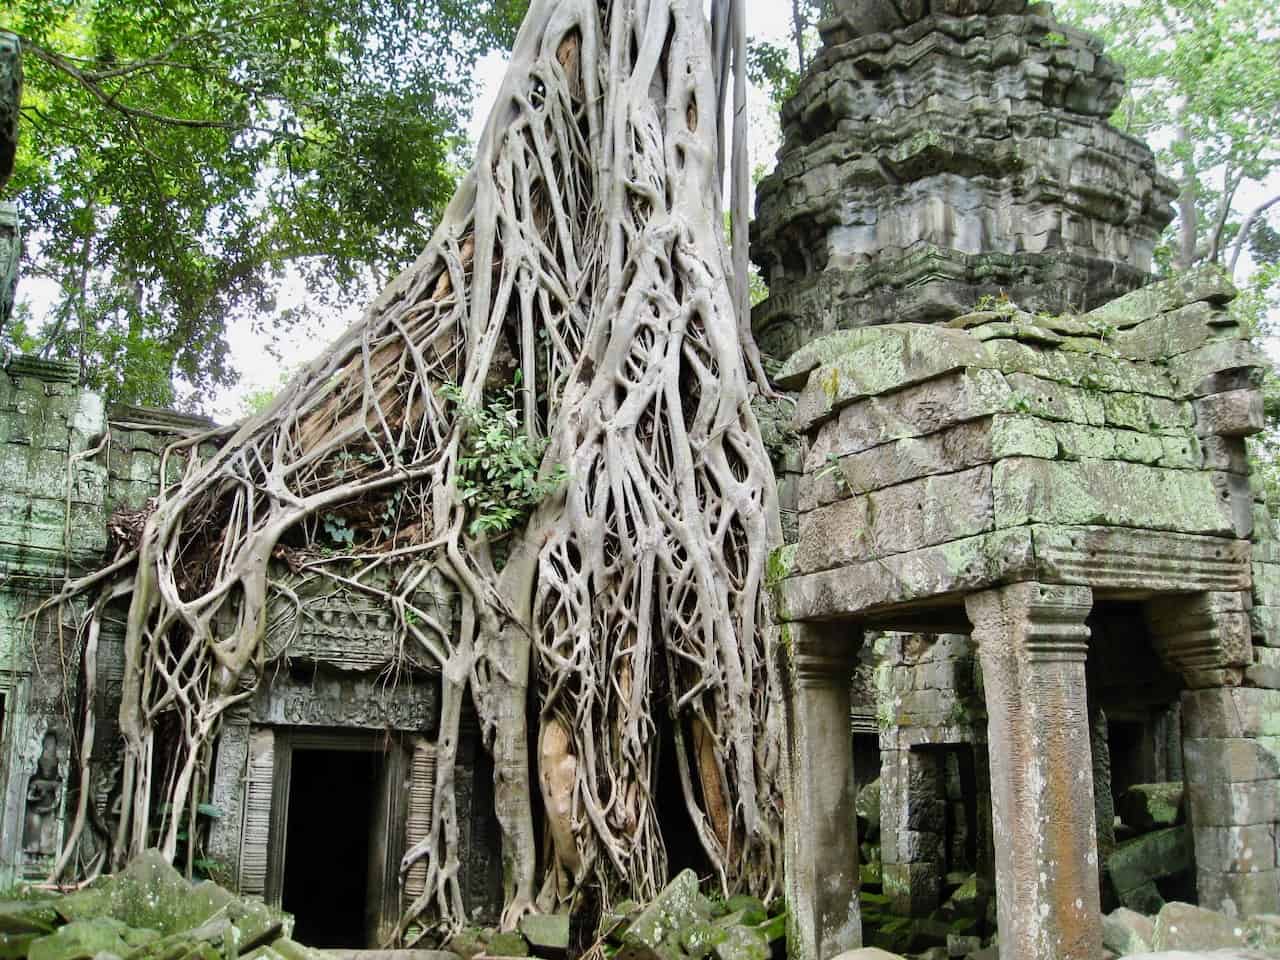 Touring the ancient Angkor Wat temples in Cambodia